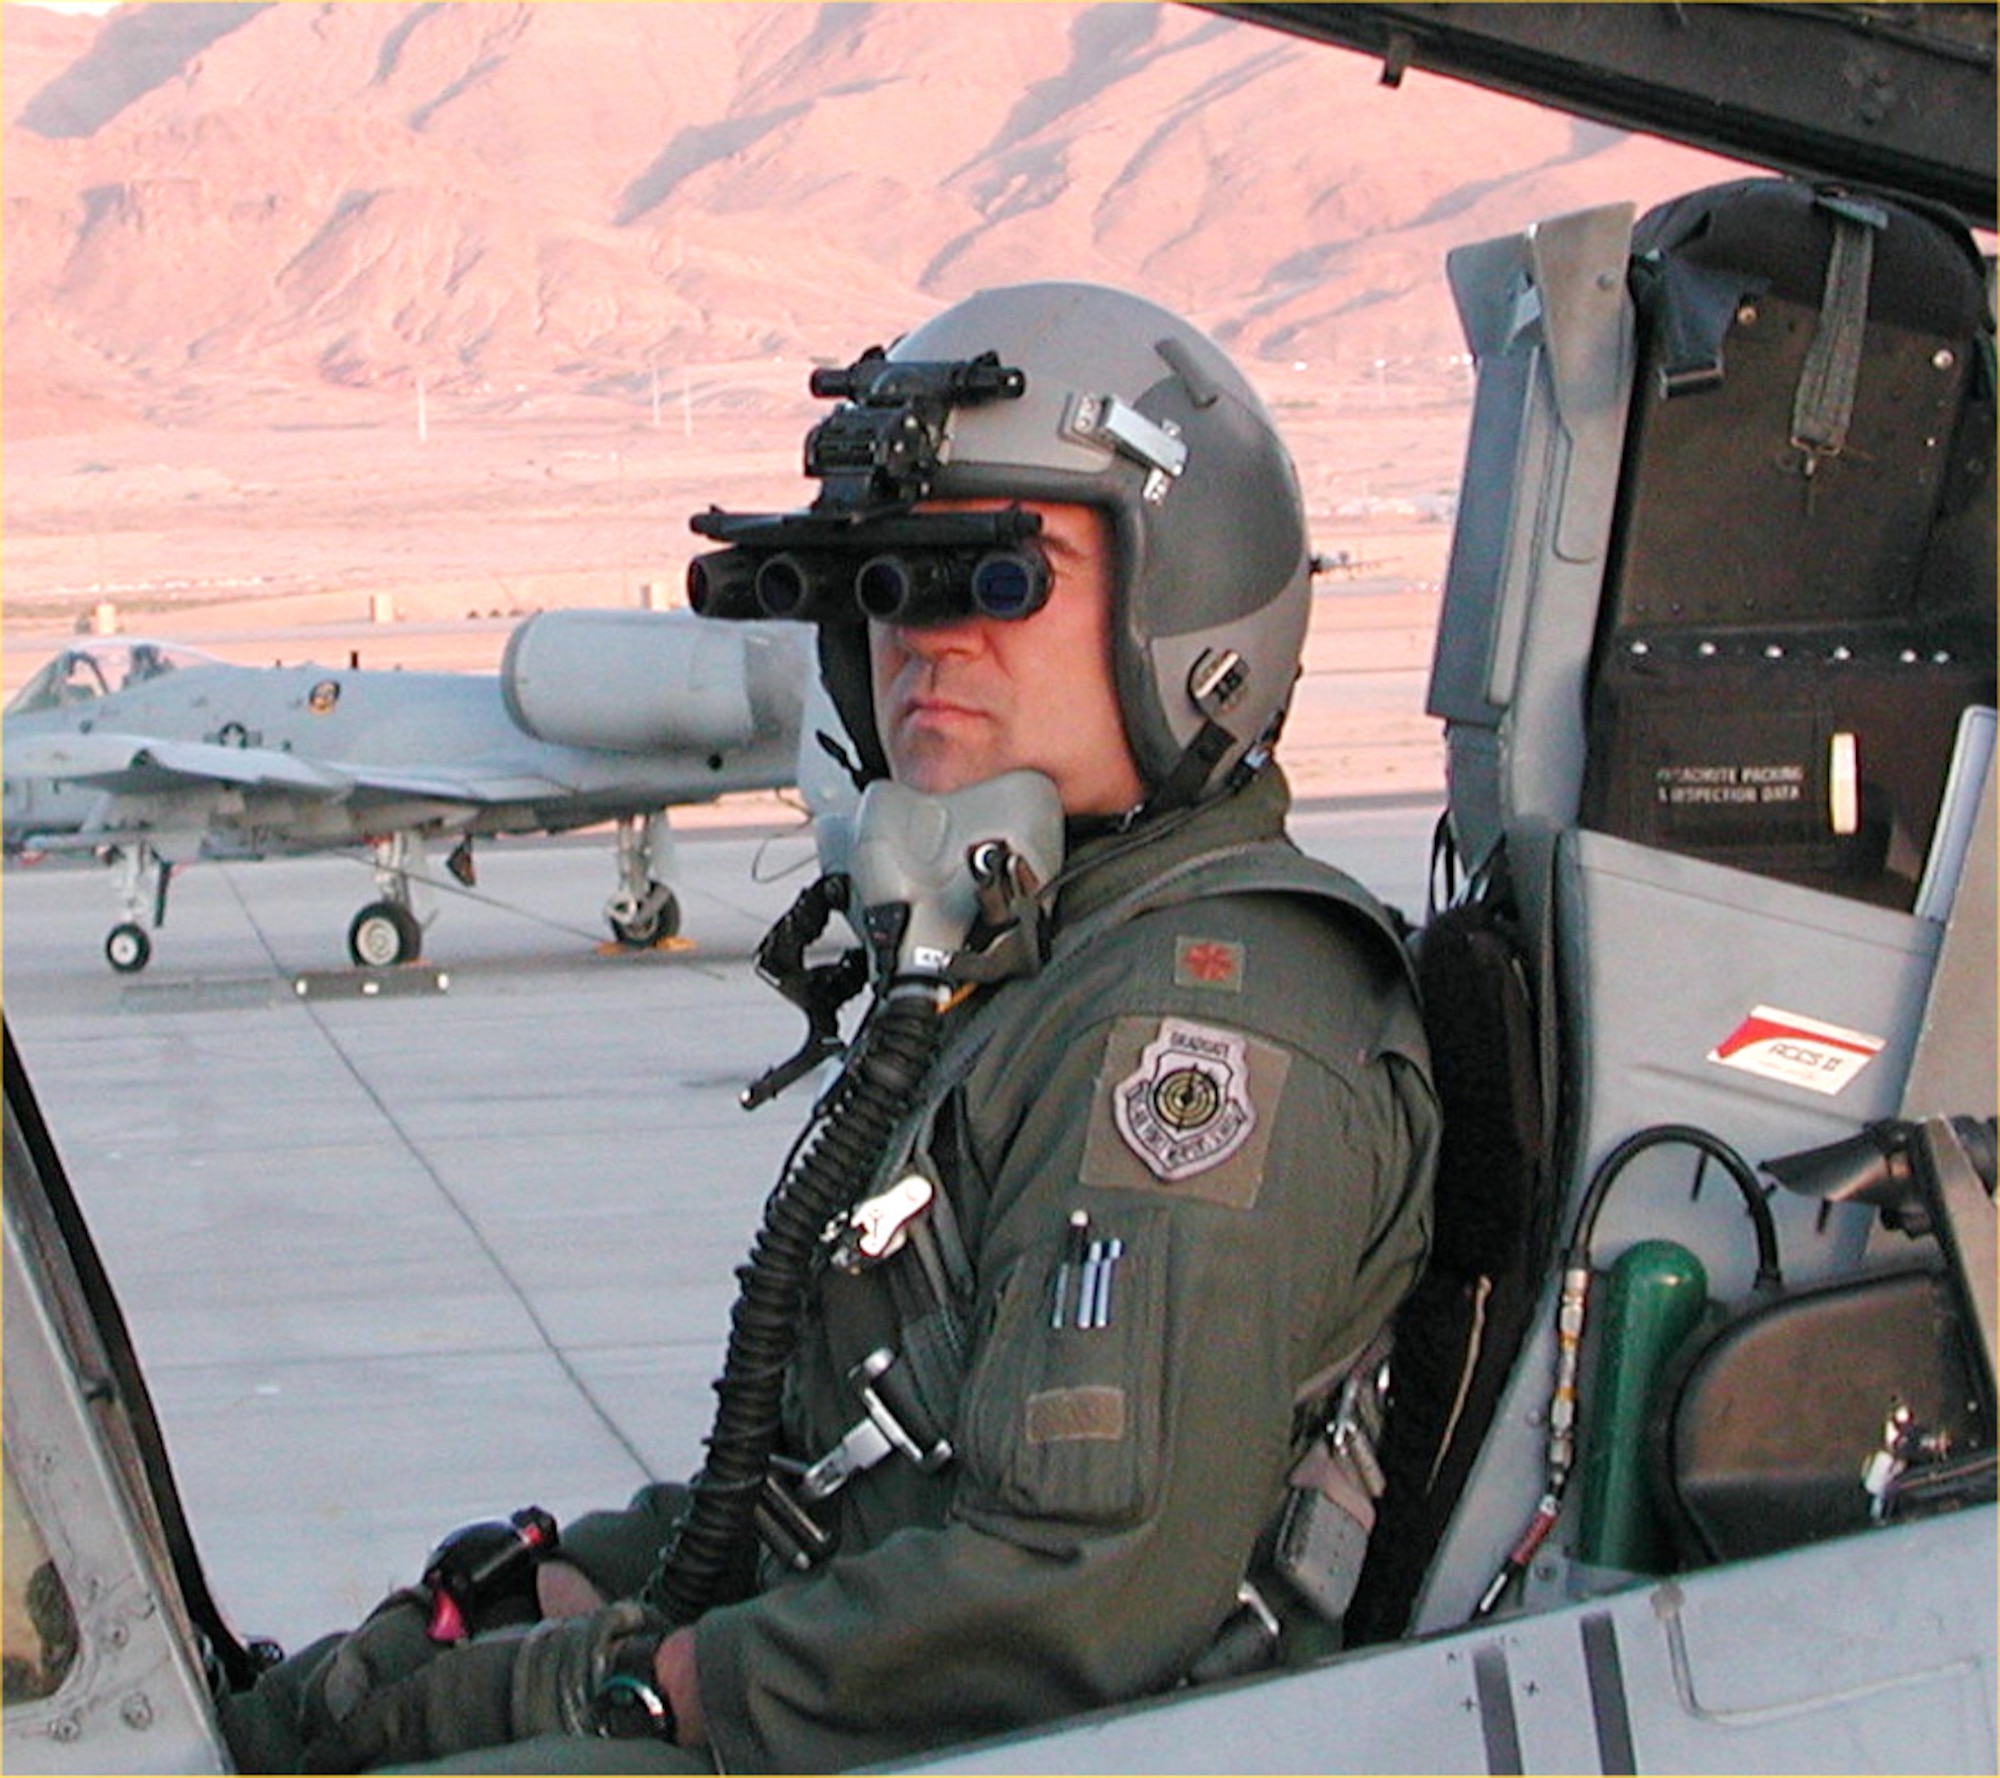 NELLIS AIR FORCE BASE, Nev. -- A pilot with the 422nd Test and Evaluation Squadron here tests panoramic night-vision goggles on an A-10 Thunderbolt II.  The first shipment of PNVGs was received April 25 by special operations Airmen for use by their AC-130 gunship and MC-130 Combat Talon aircrews.  A-10 Thunderbolt II aircrews are scheduled to receive the goggles in future procurements.  (U.S. Air Force photo)